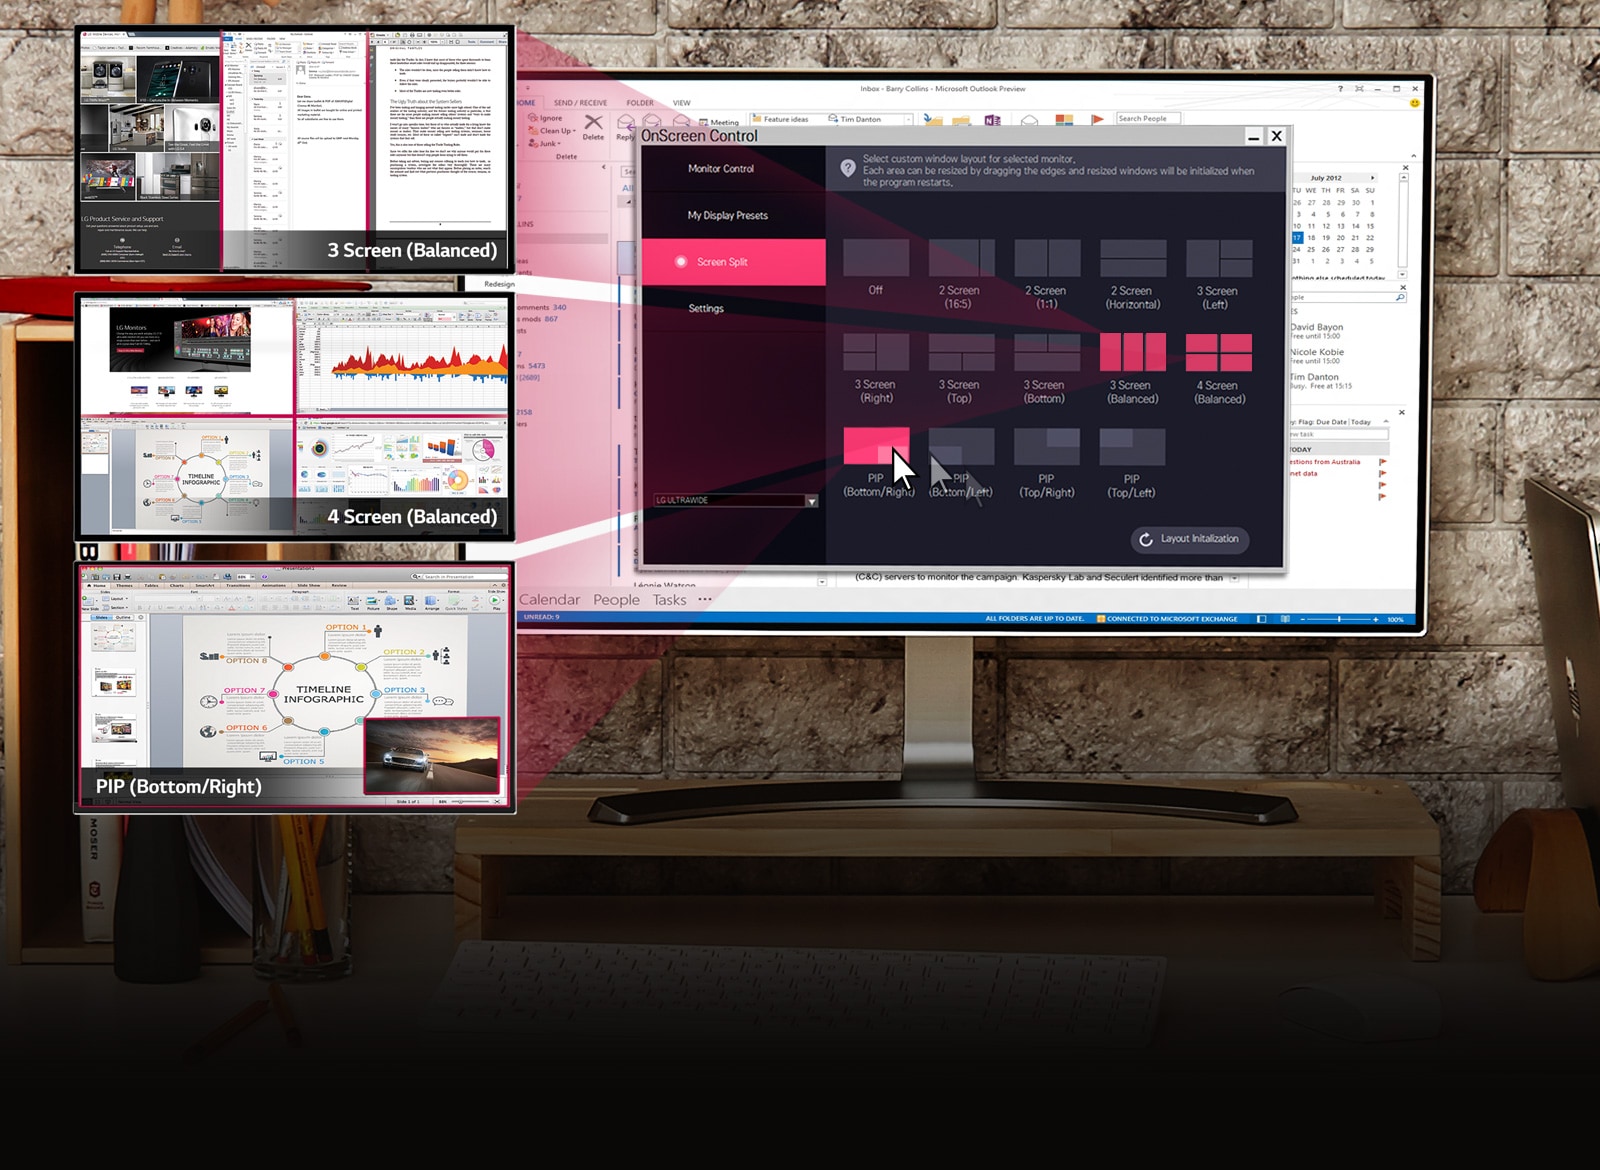 Customize Your Workspace for Multitasking1